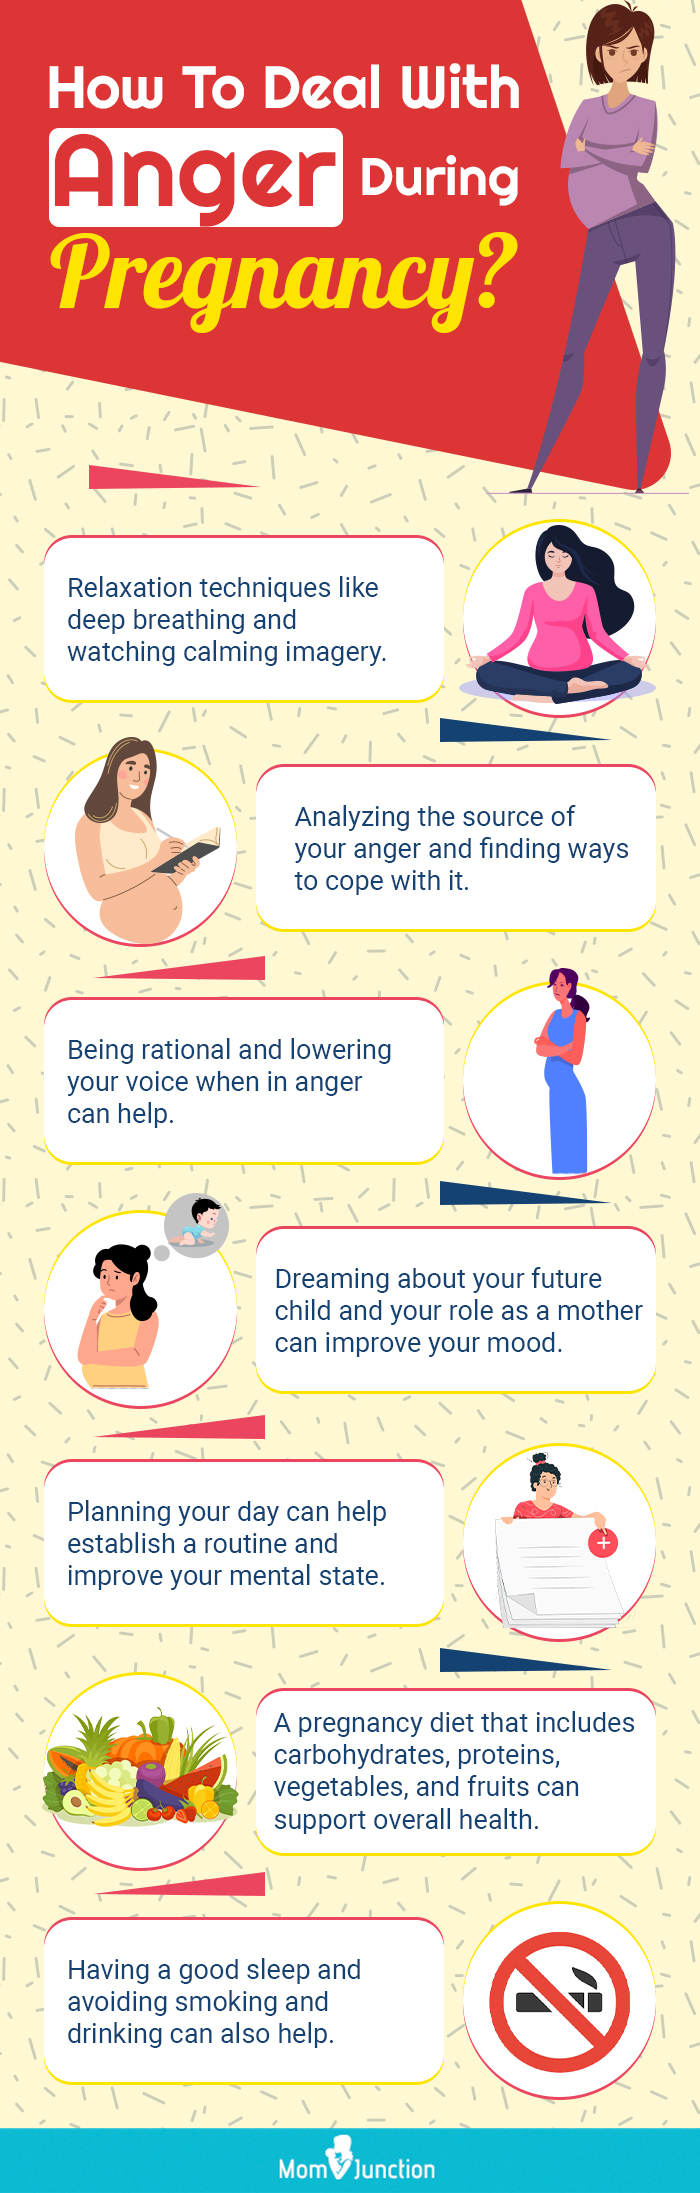 how to deal with anger during pregnancy (infographic)